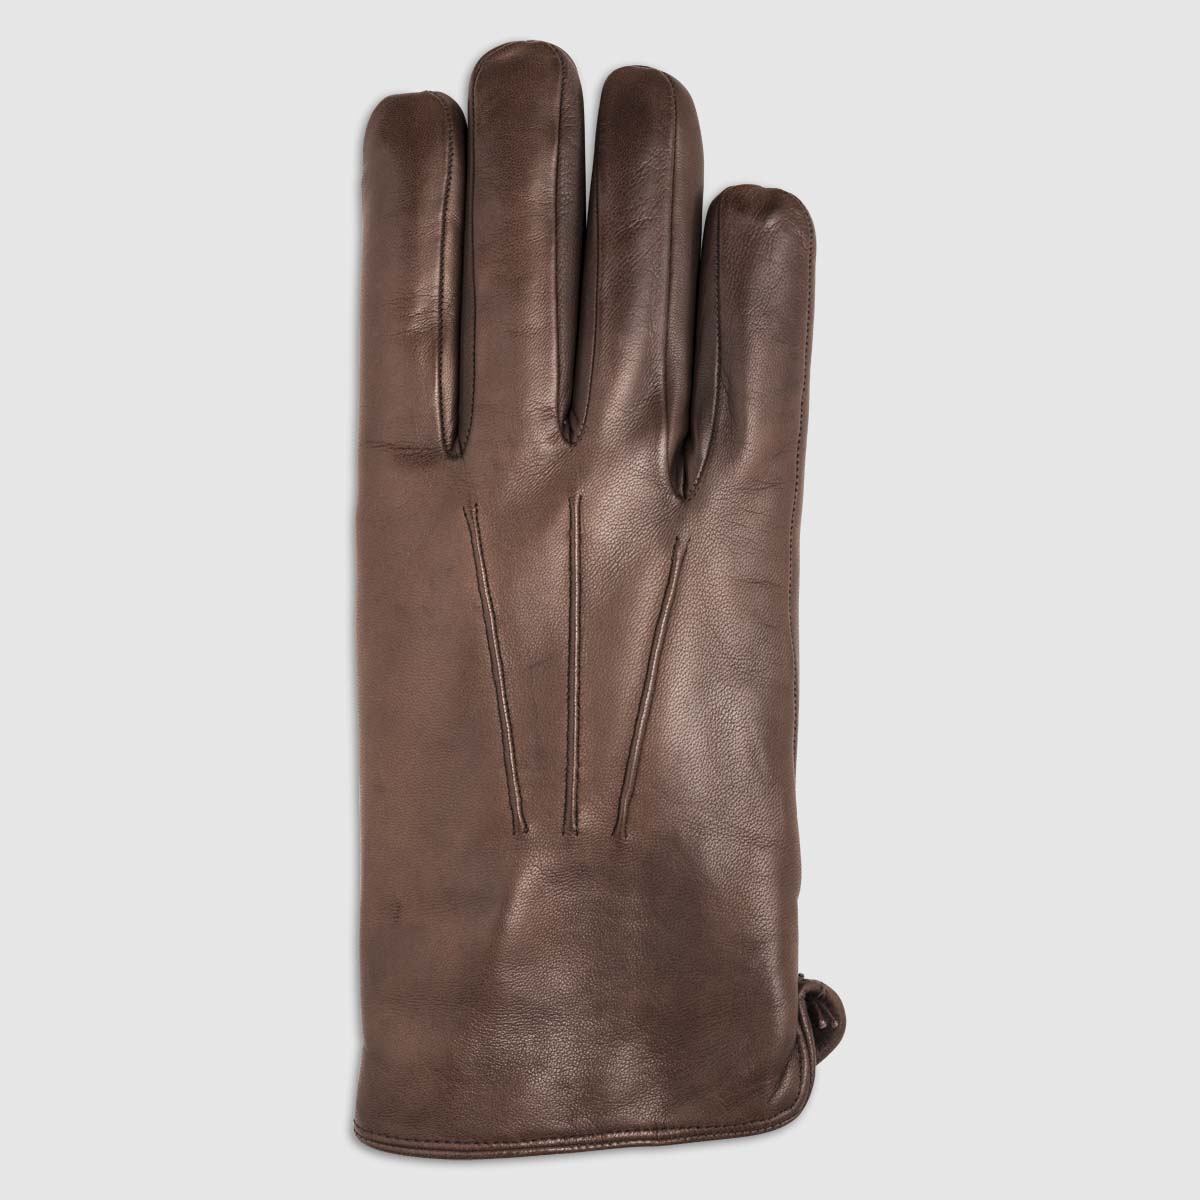 Nappa Leather Glove with Lapin Lining in Brown Alpo Guanti on sale 2022